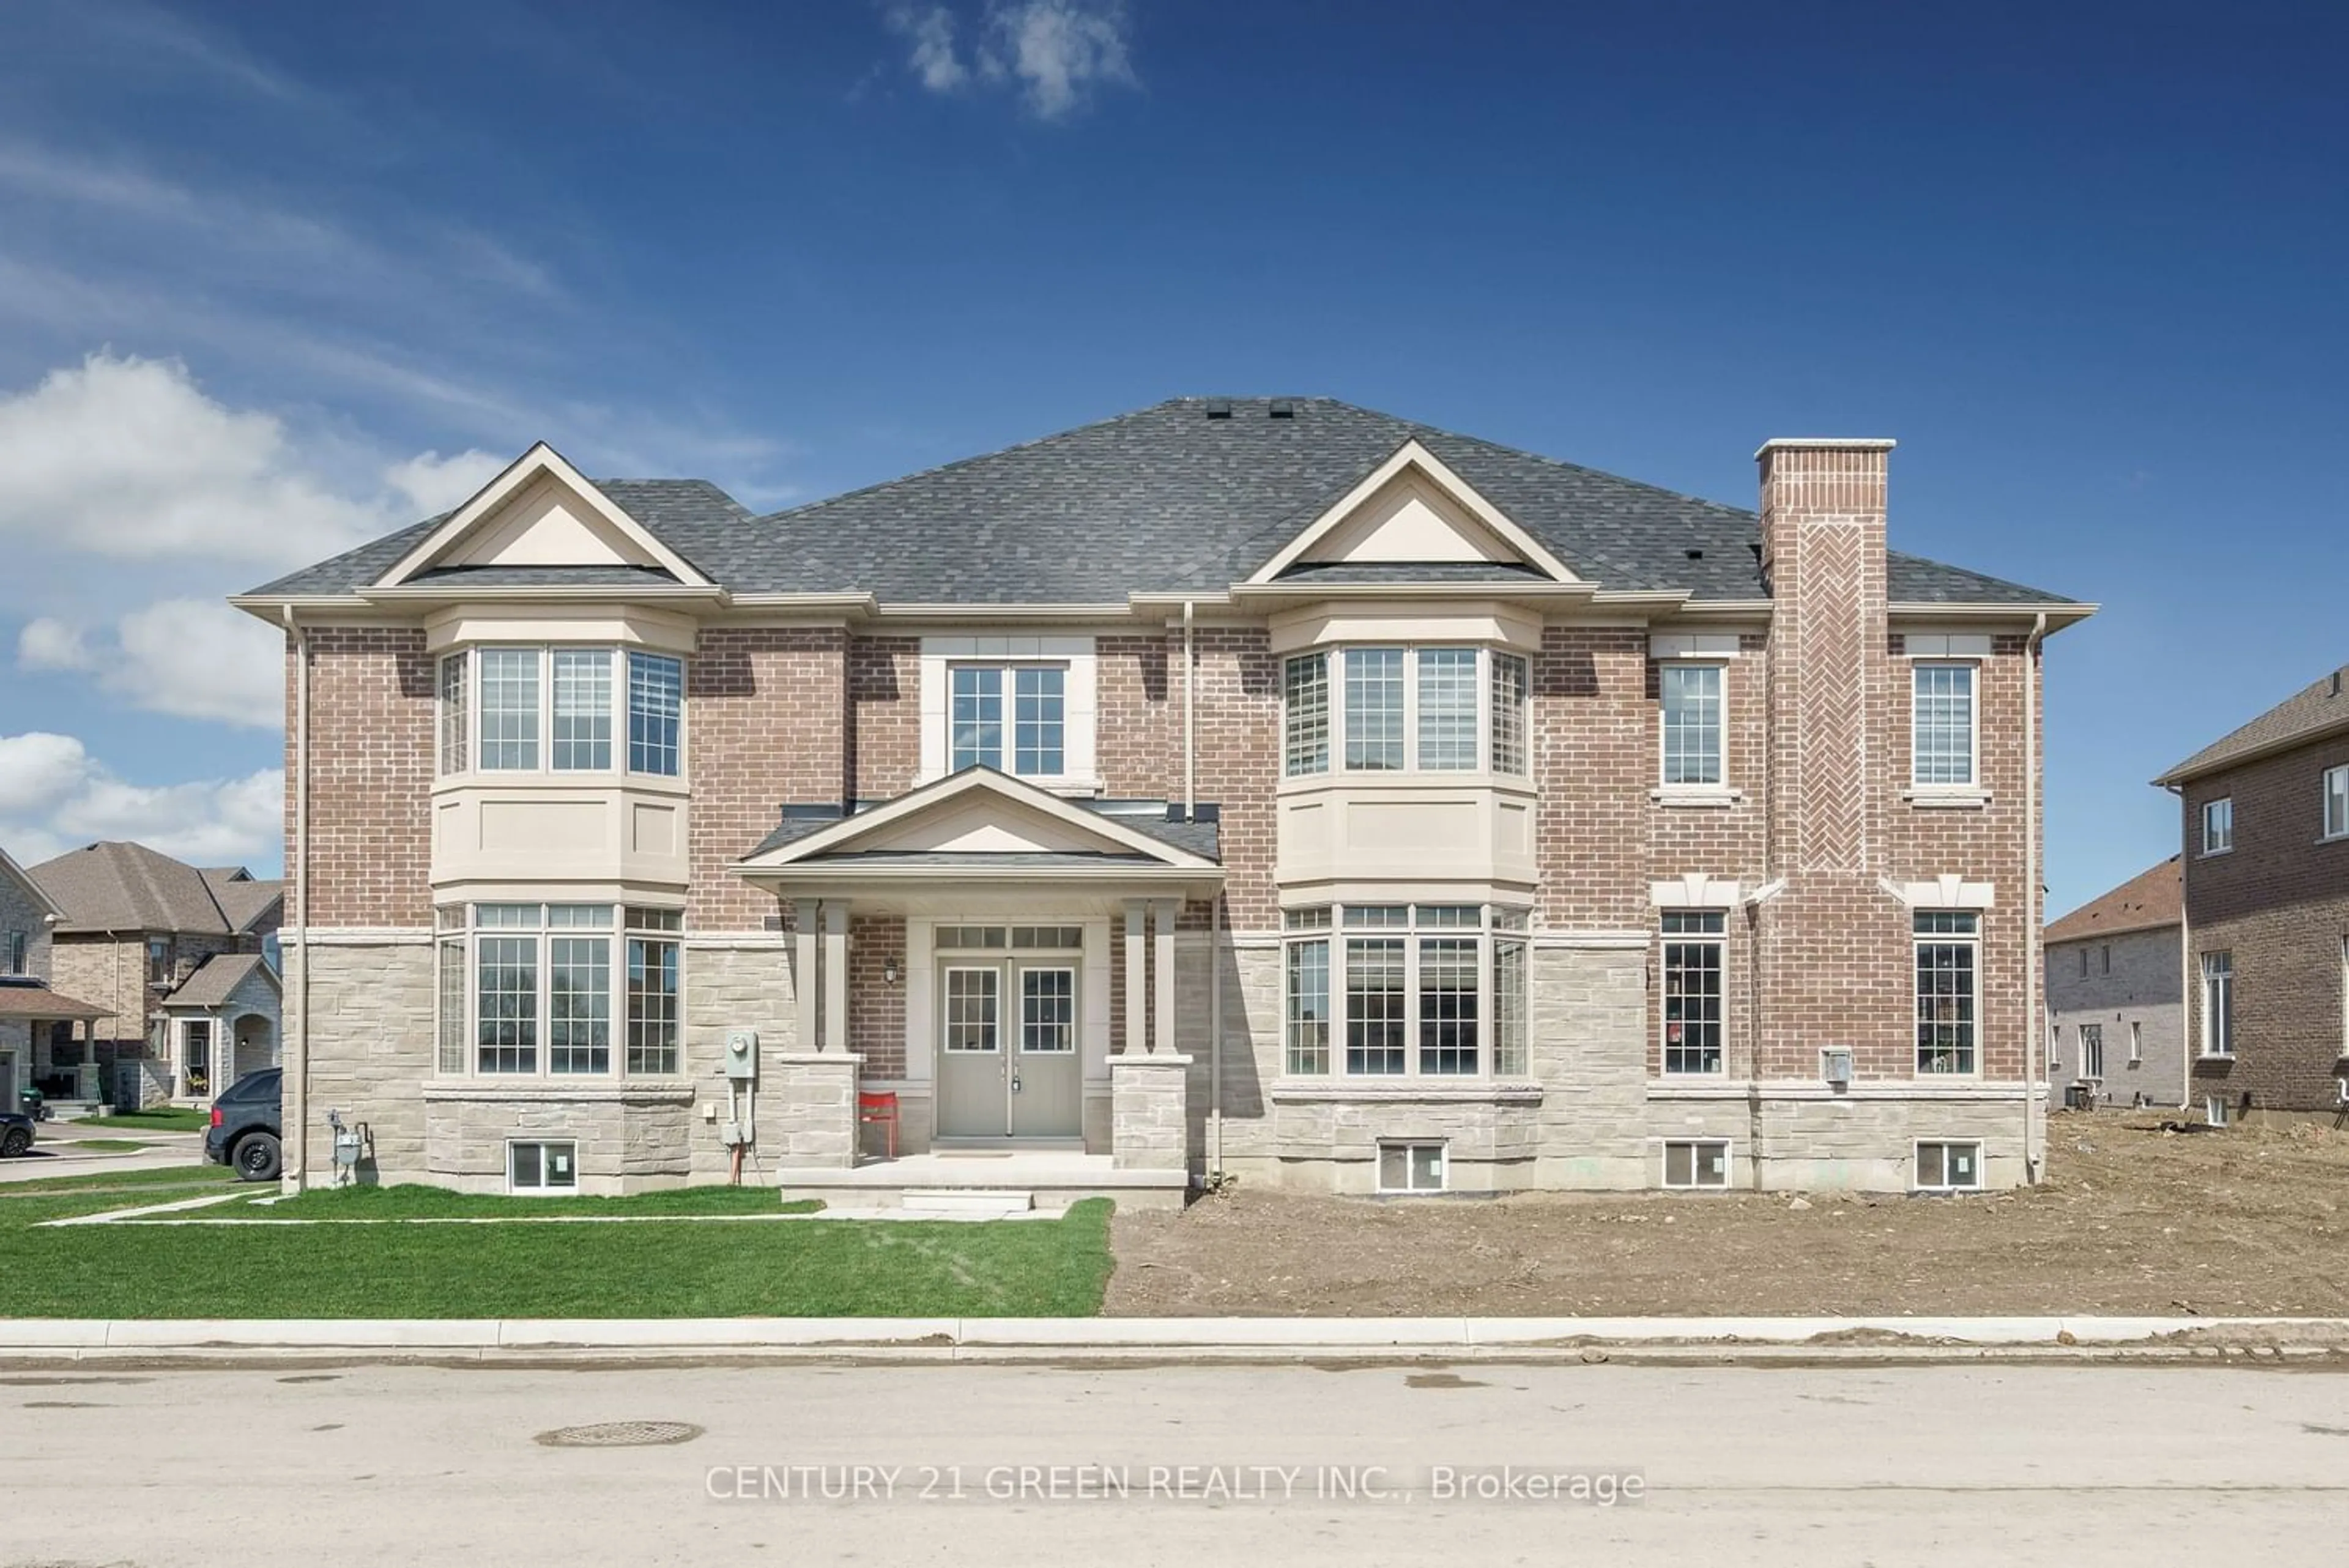 Home with brick exterior material for 129 Ferragine Cres, Bradford West Gwillimbury Ontario L3Z 2A6